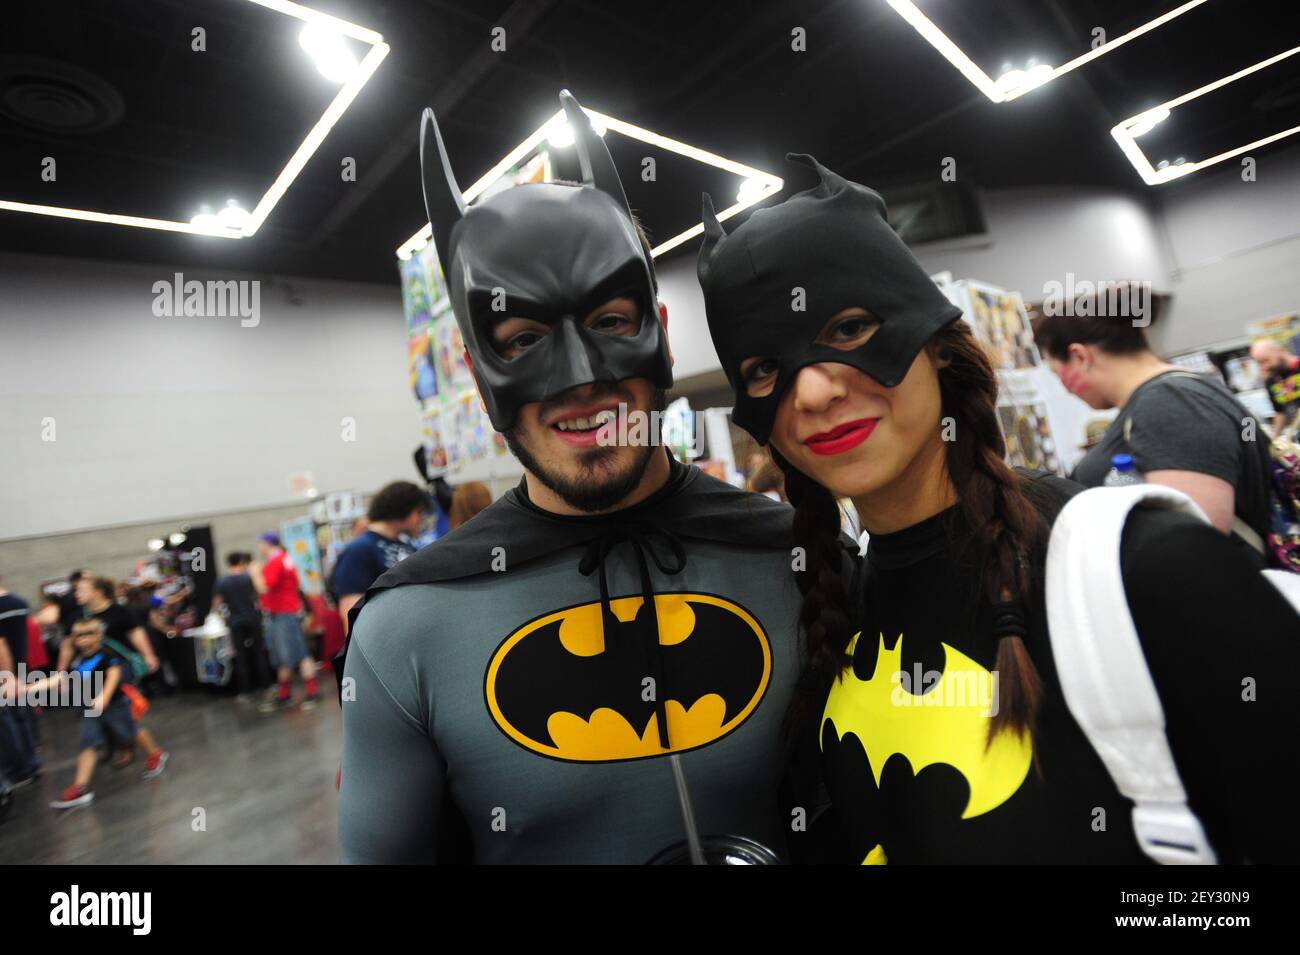 Batman and Batwoman pose for pictures at the Rose City Comic Con in  Portland, Ore., on September 20, 2014. The two day event attracts hundreds  of cosplayers and comic book fanatics from